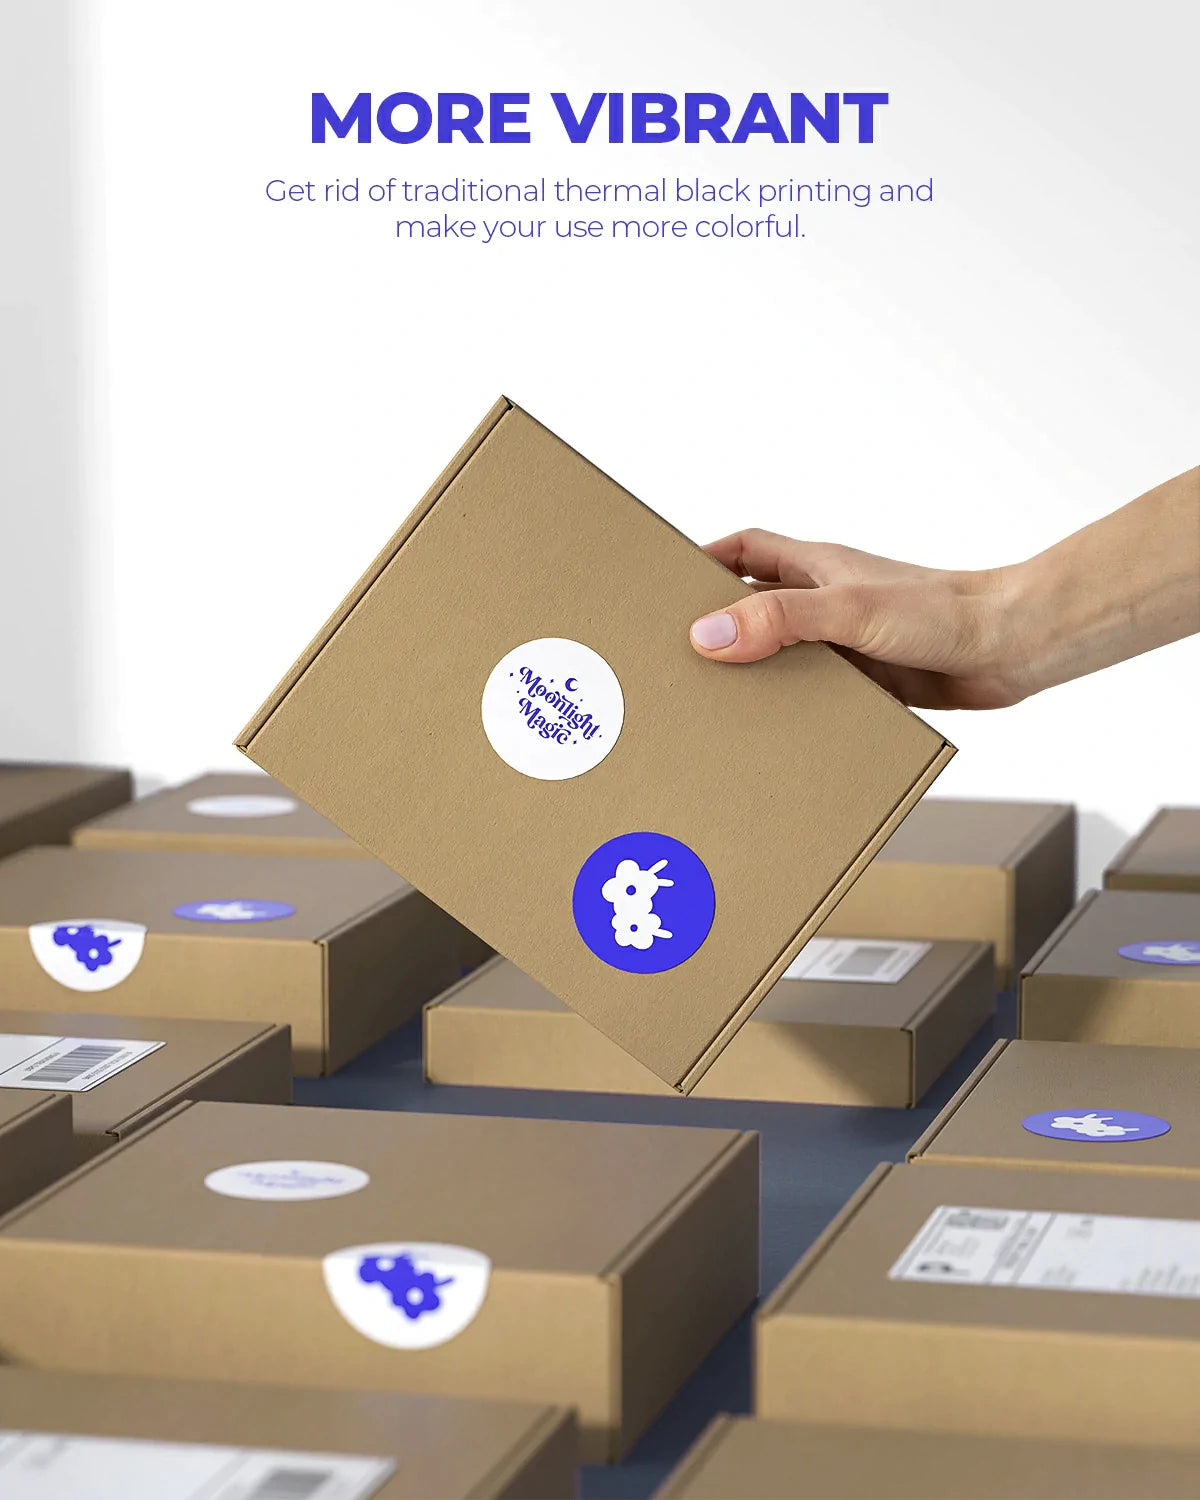 MUNBYN 2" blue printing thermal label stickers can make your packages more colorful.